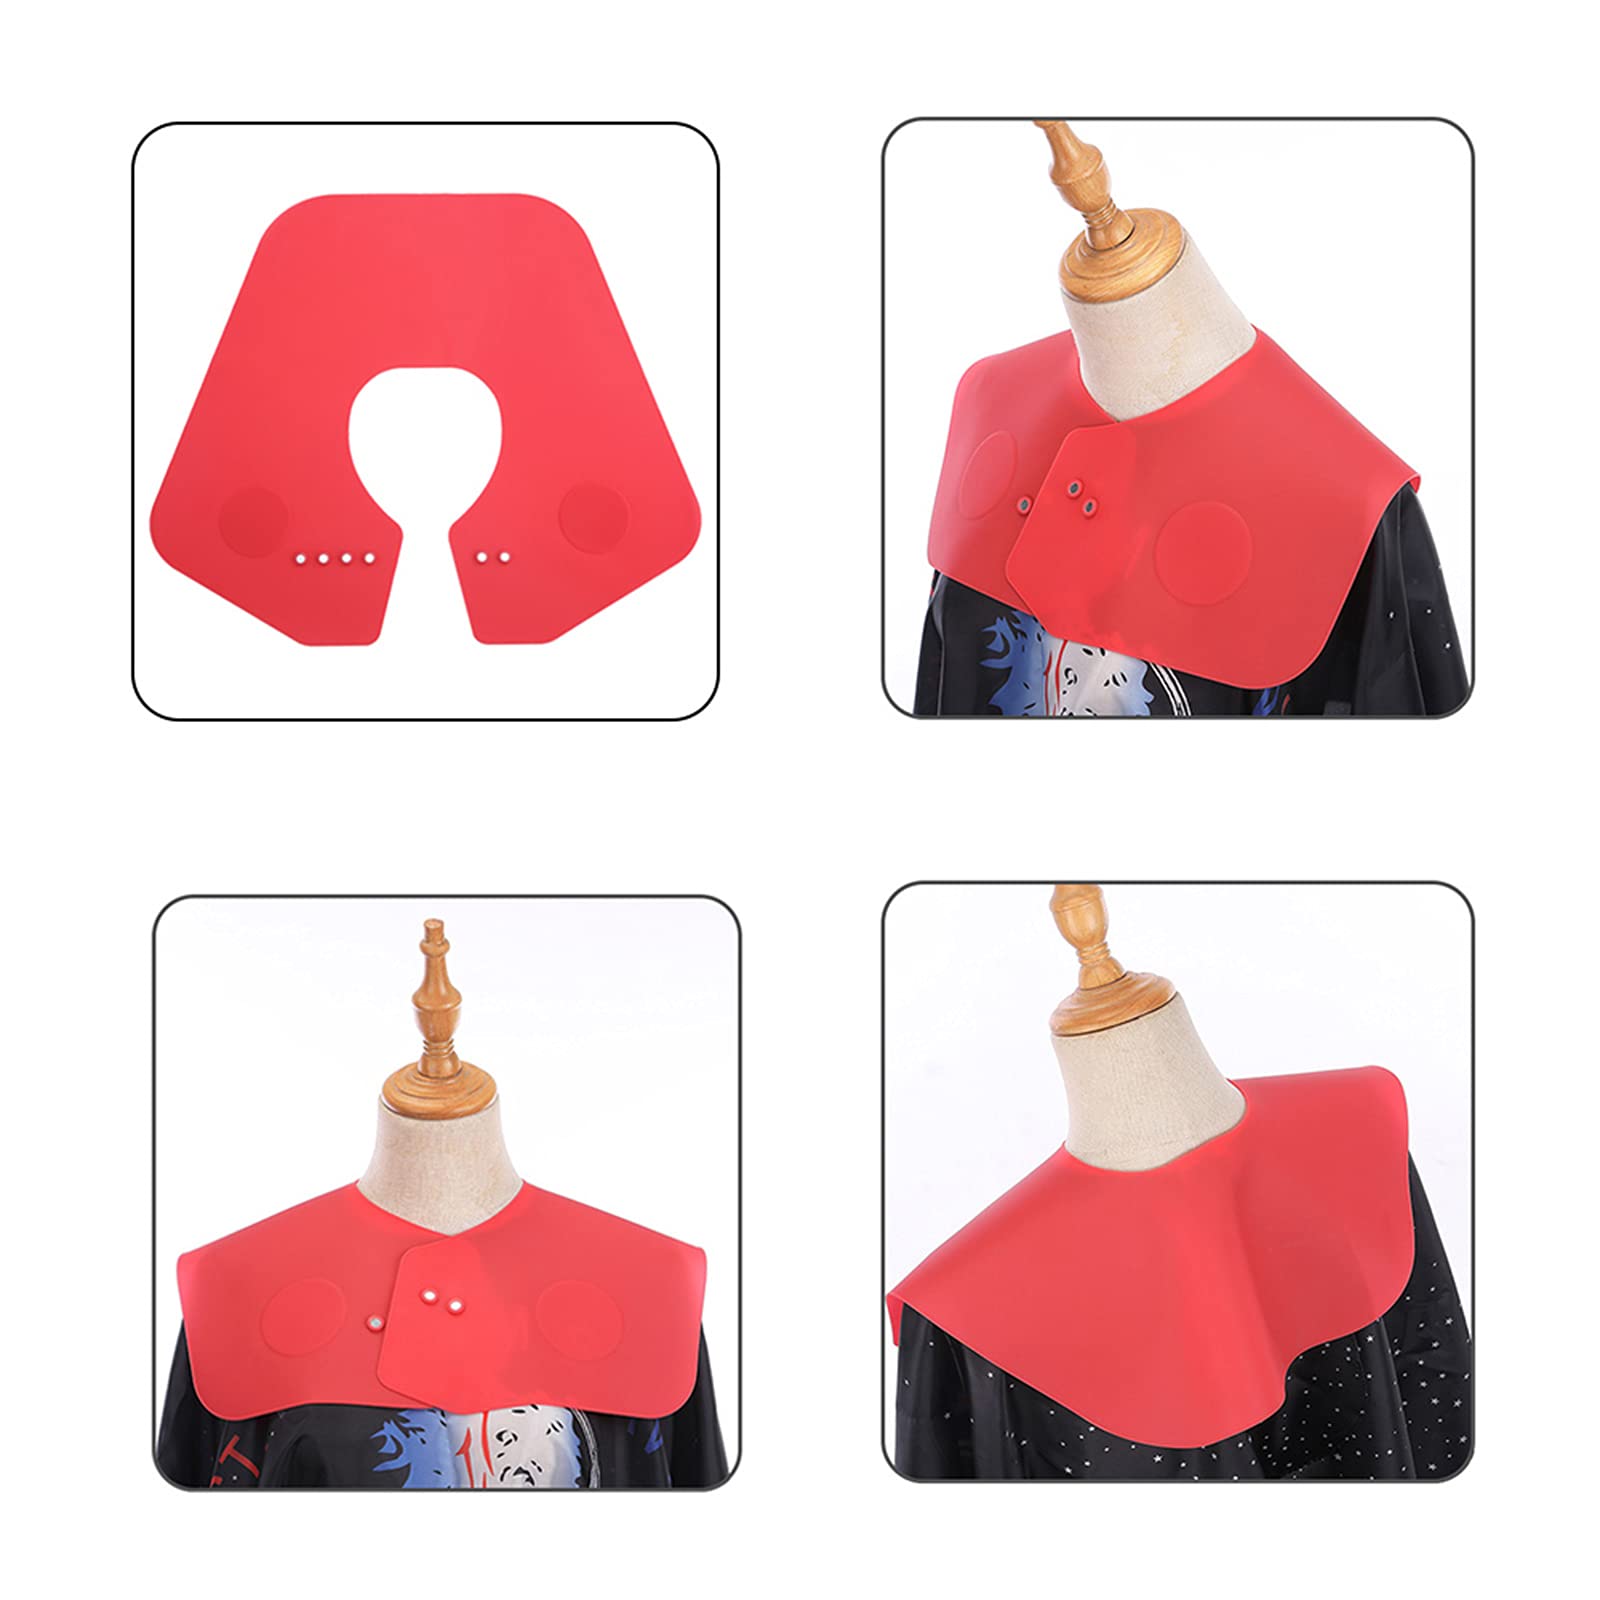 Layhou Silicone Neck Cape Adjustable Apron for Haircut Hair Dye Hairdressing Cutting Collar for Hair Salon Stylist